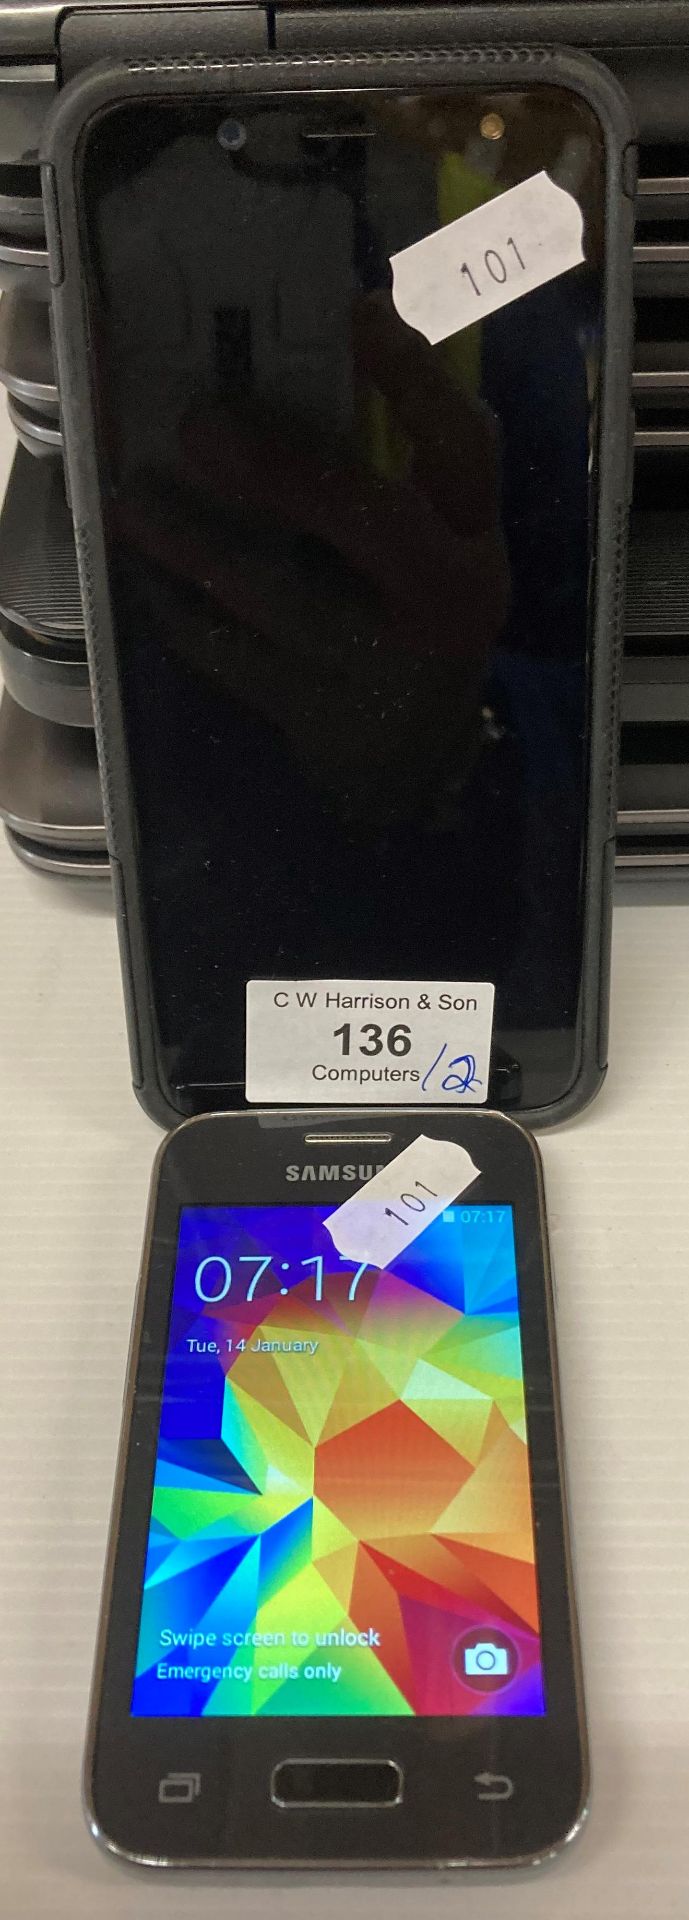 Samsung Galaxy A6 mobile phone and a Samsung Galaxy Young 2 mobile phone (2) (saleroom location